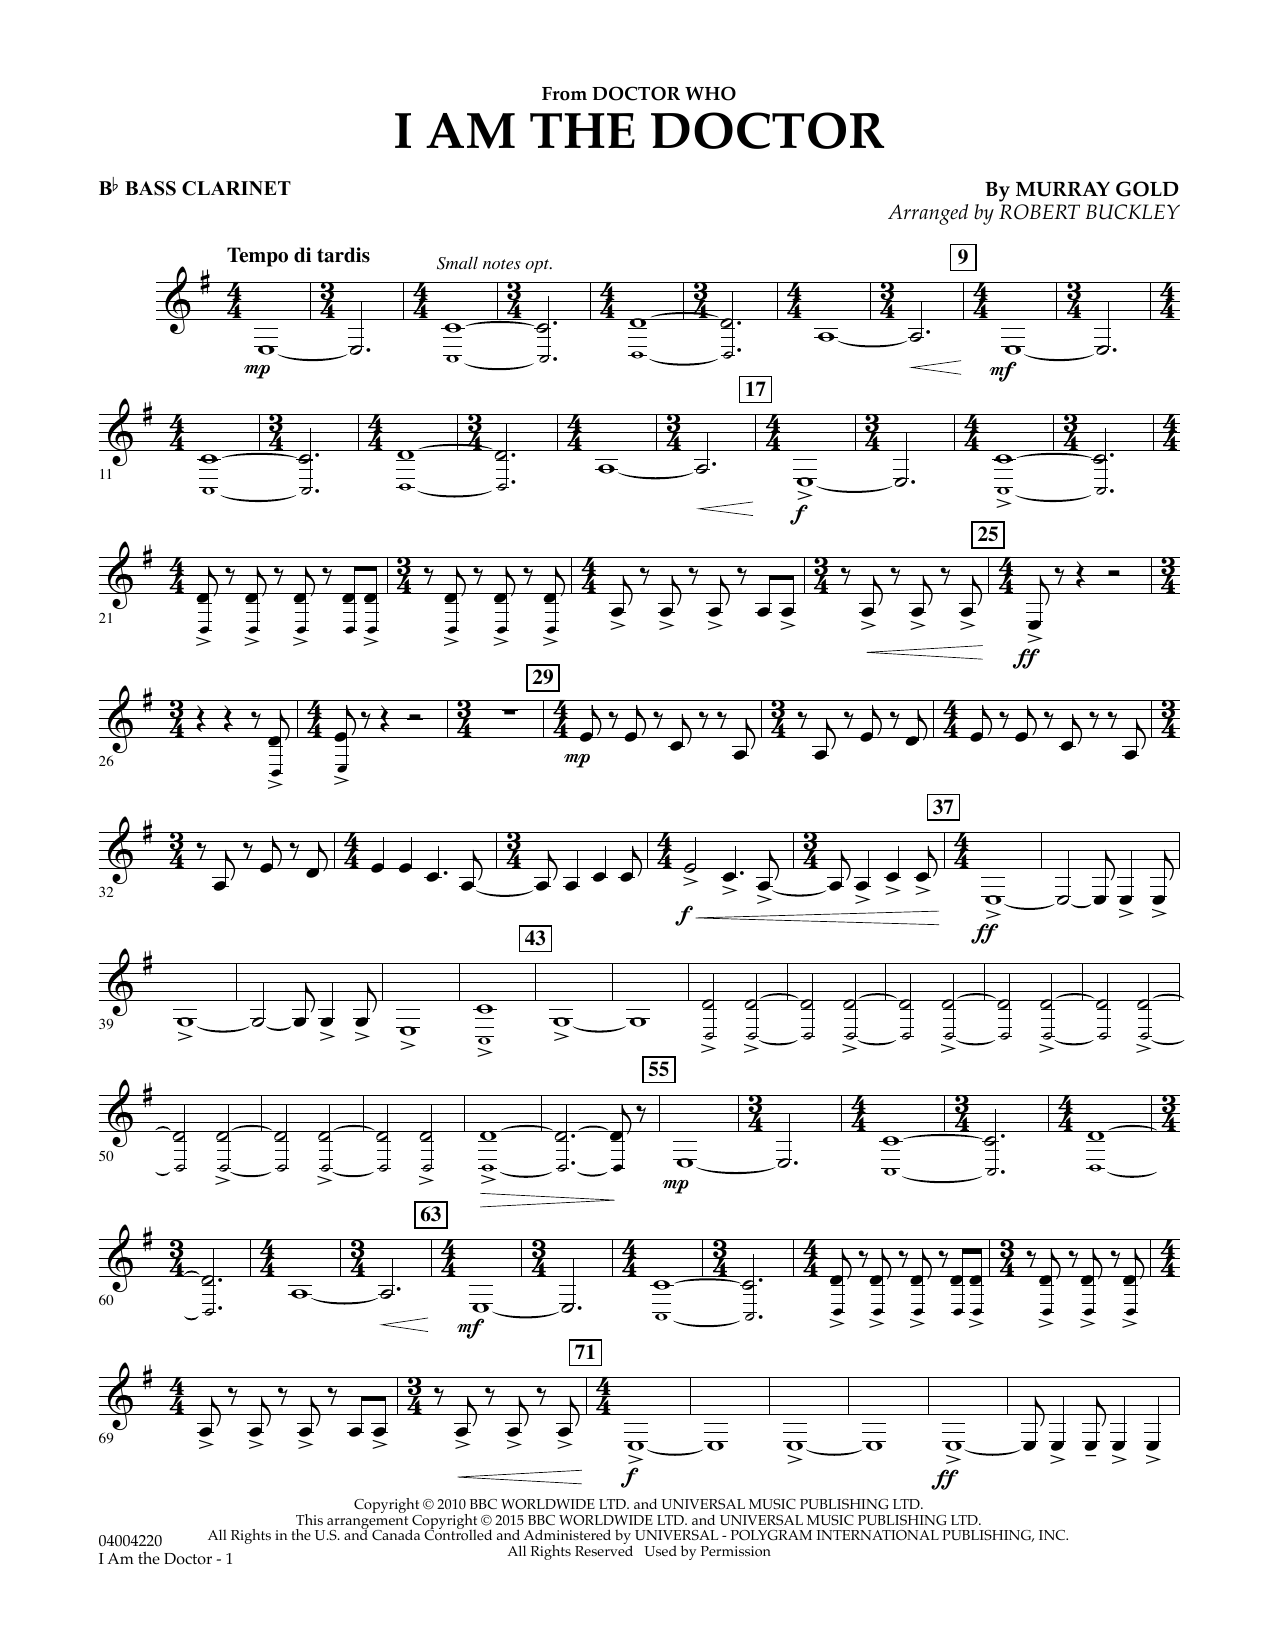 Robert Buckley I Am the Doctor (from Doctor Who) - Bb Bass Clarinet sheet music notes and chords. Download Printable PDF.